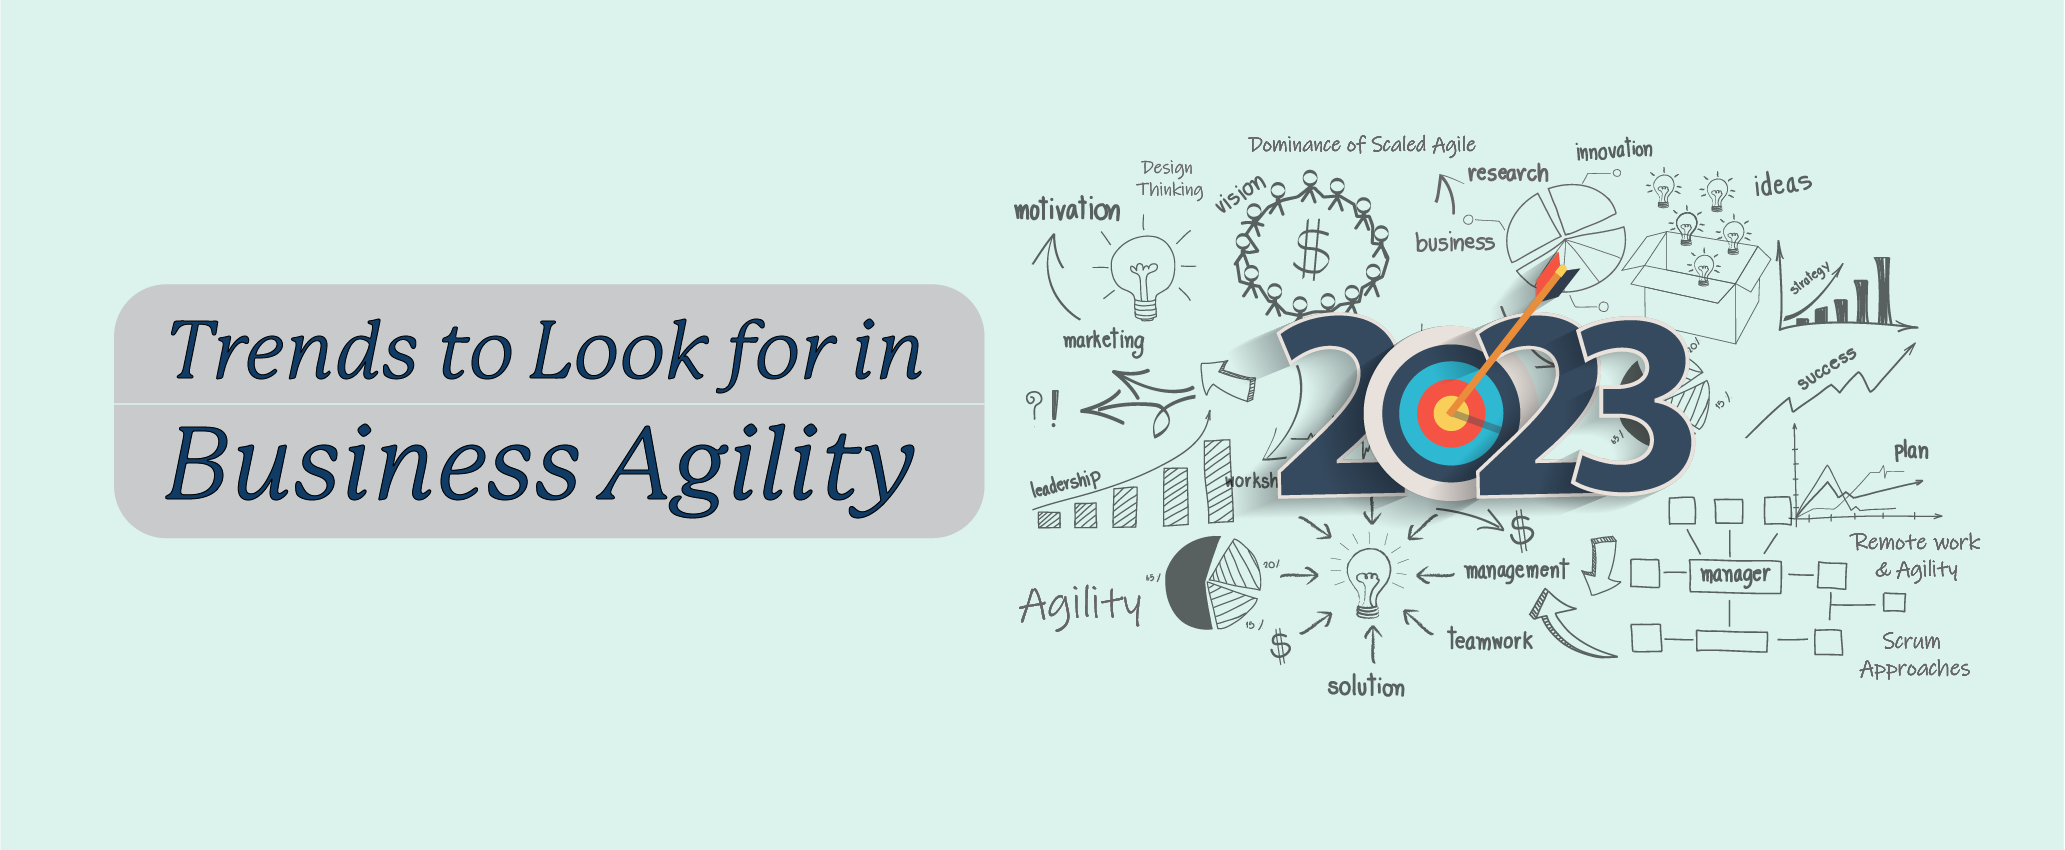 Trends to Look for in Business Agility